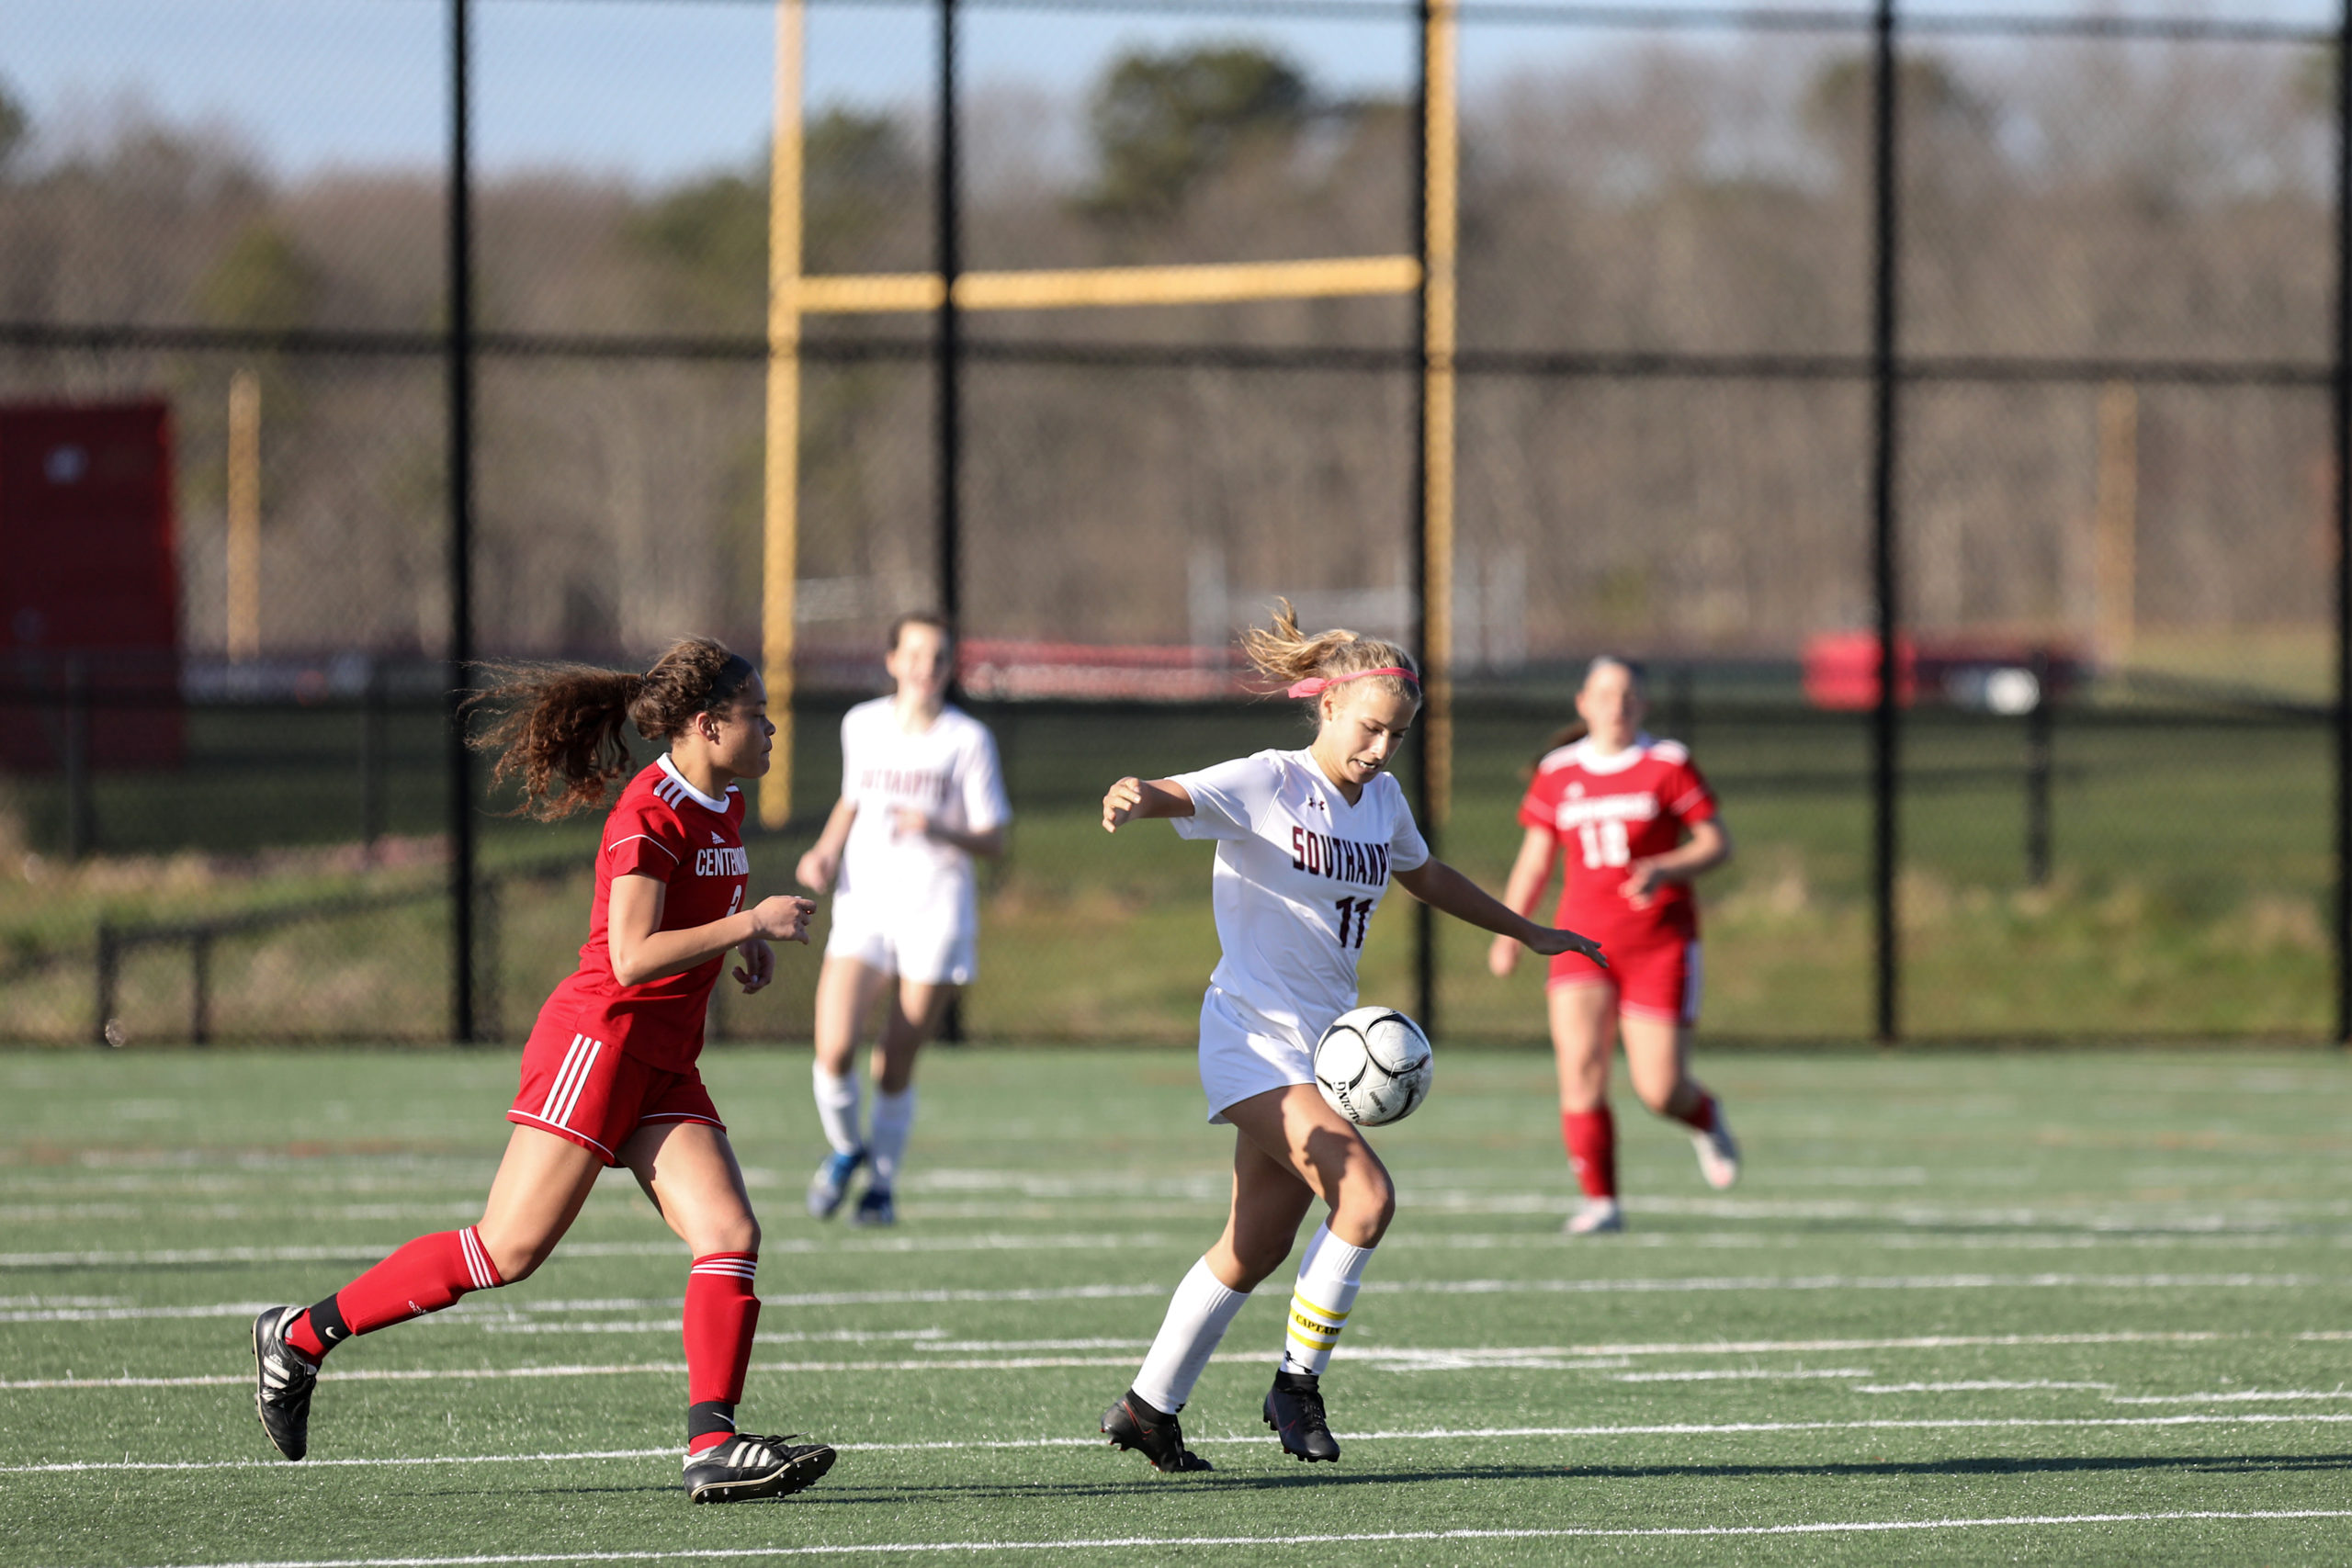 Southampton junior Charlotte Cardel carries the ball across the field.